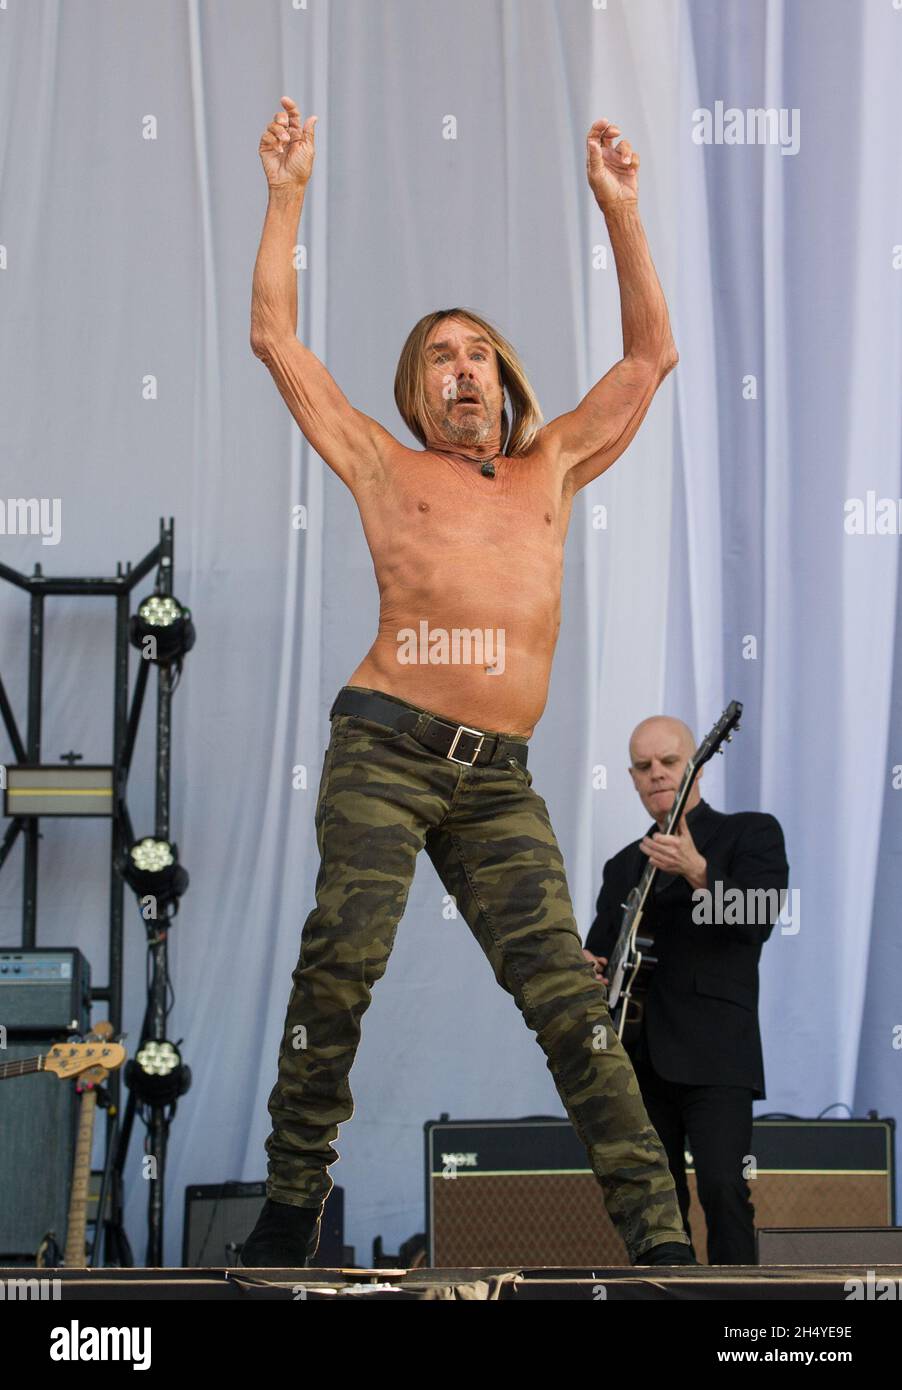 EDITORIAL USE ONLY Iggy Pop performs live on stage during Queens of the Stone Age and Friends show in Finsbury on June 2018 in London, England. Picture date: Saturday 30